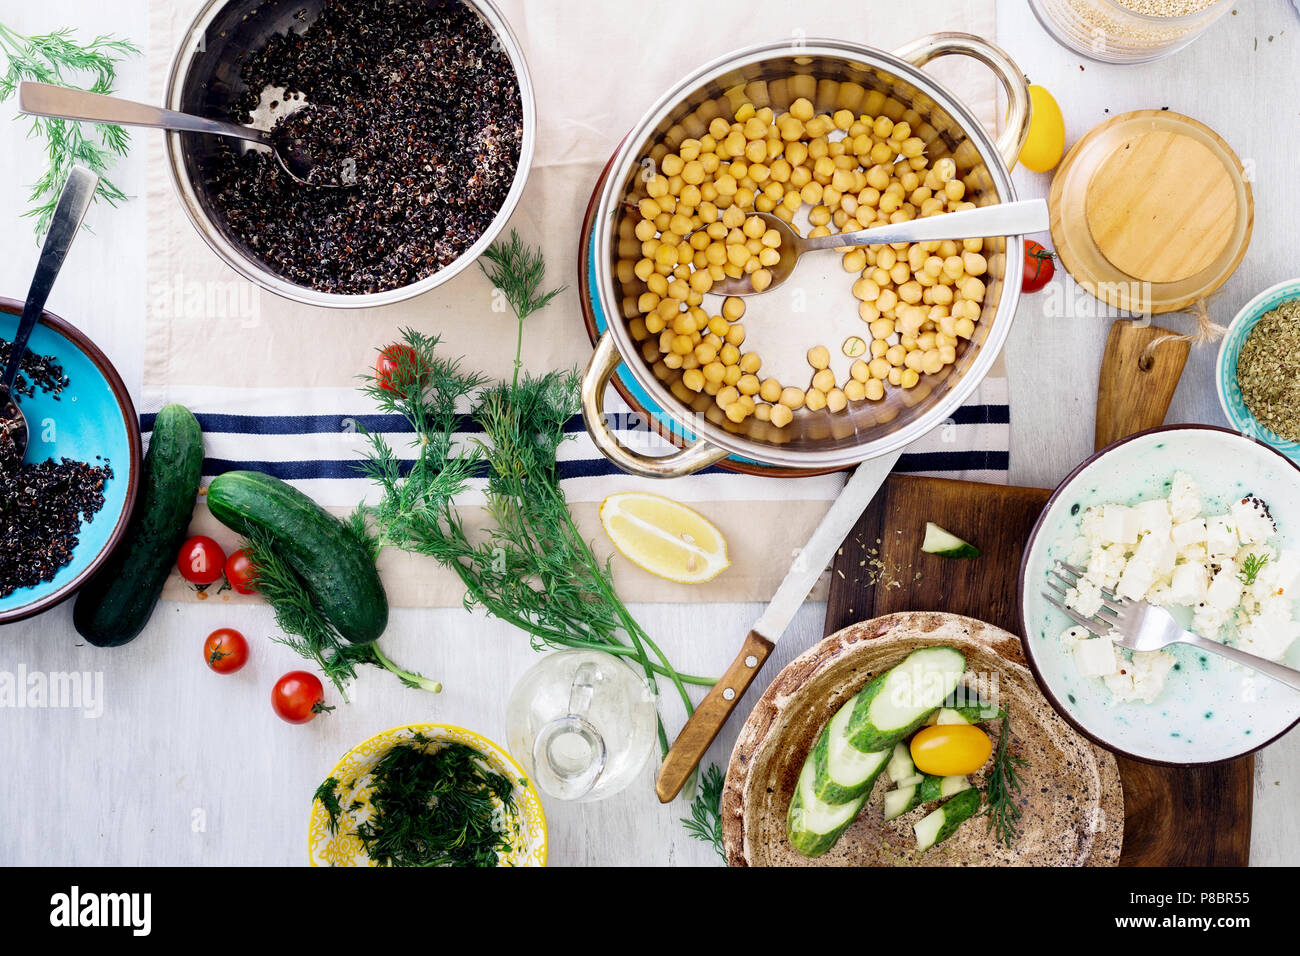 Ingredients for cooking healthy salad with black quinoa, chickpea, feta cheese and vegetables on wooden table, top view. Healthy food concept Stock Photo